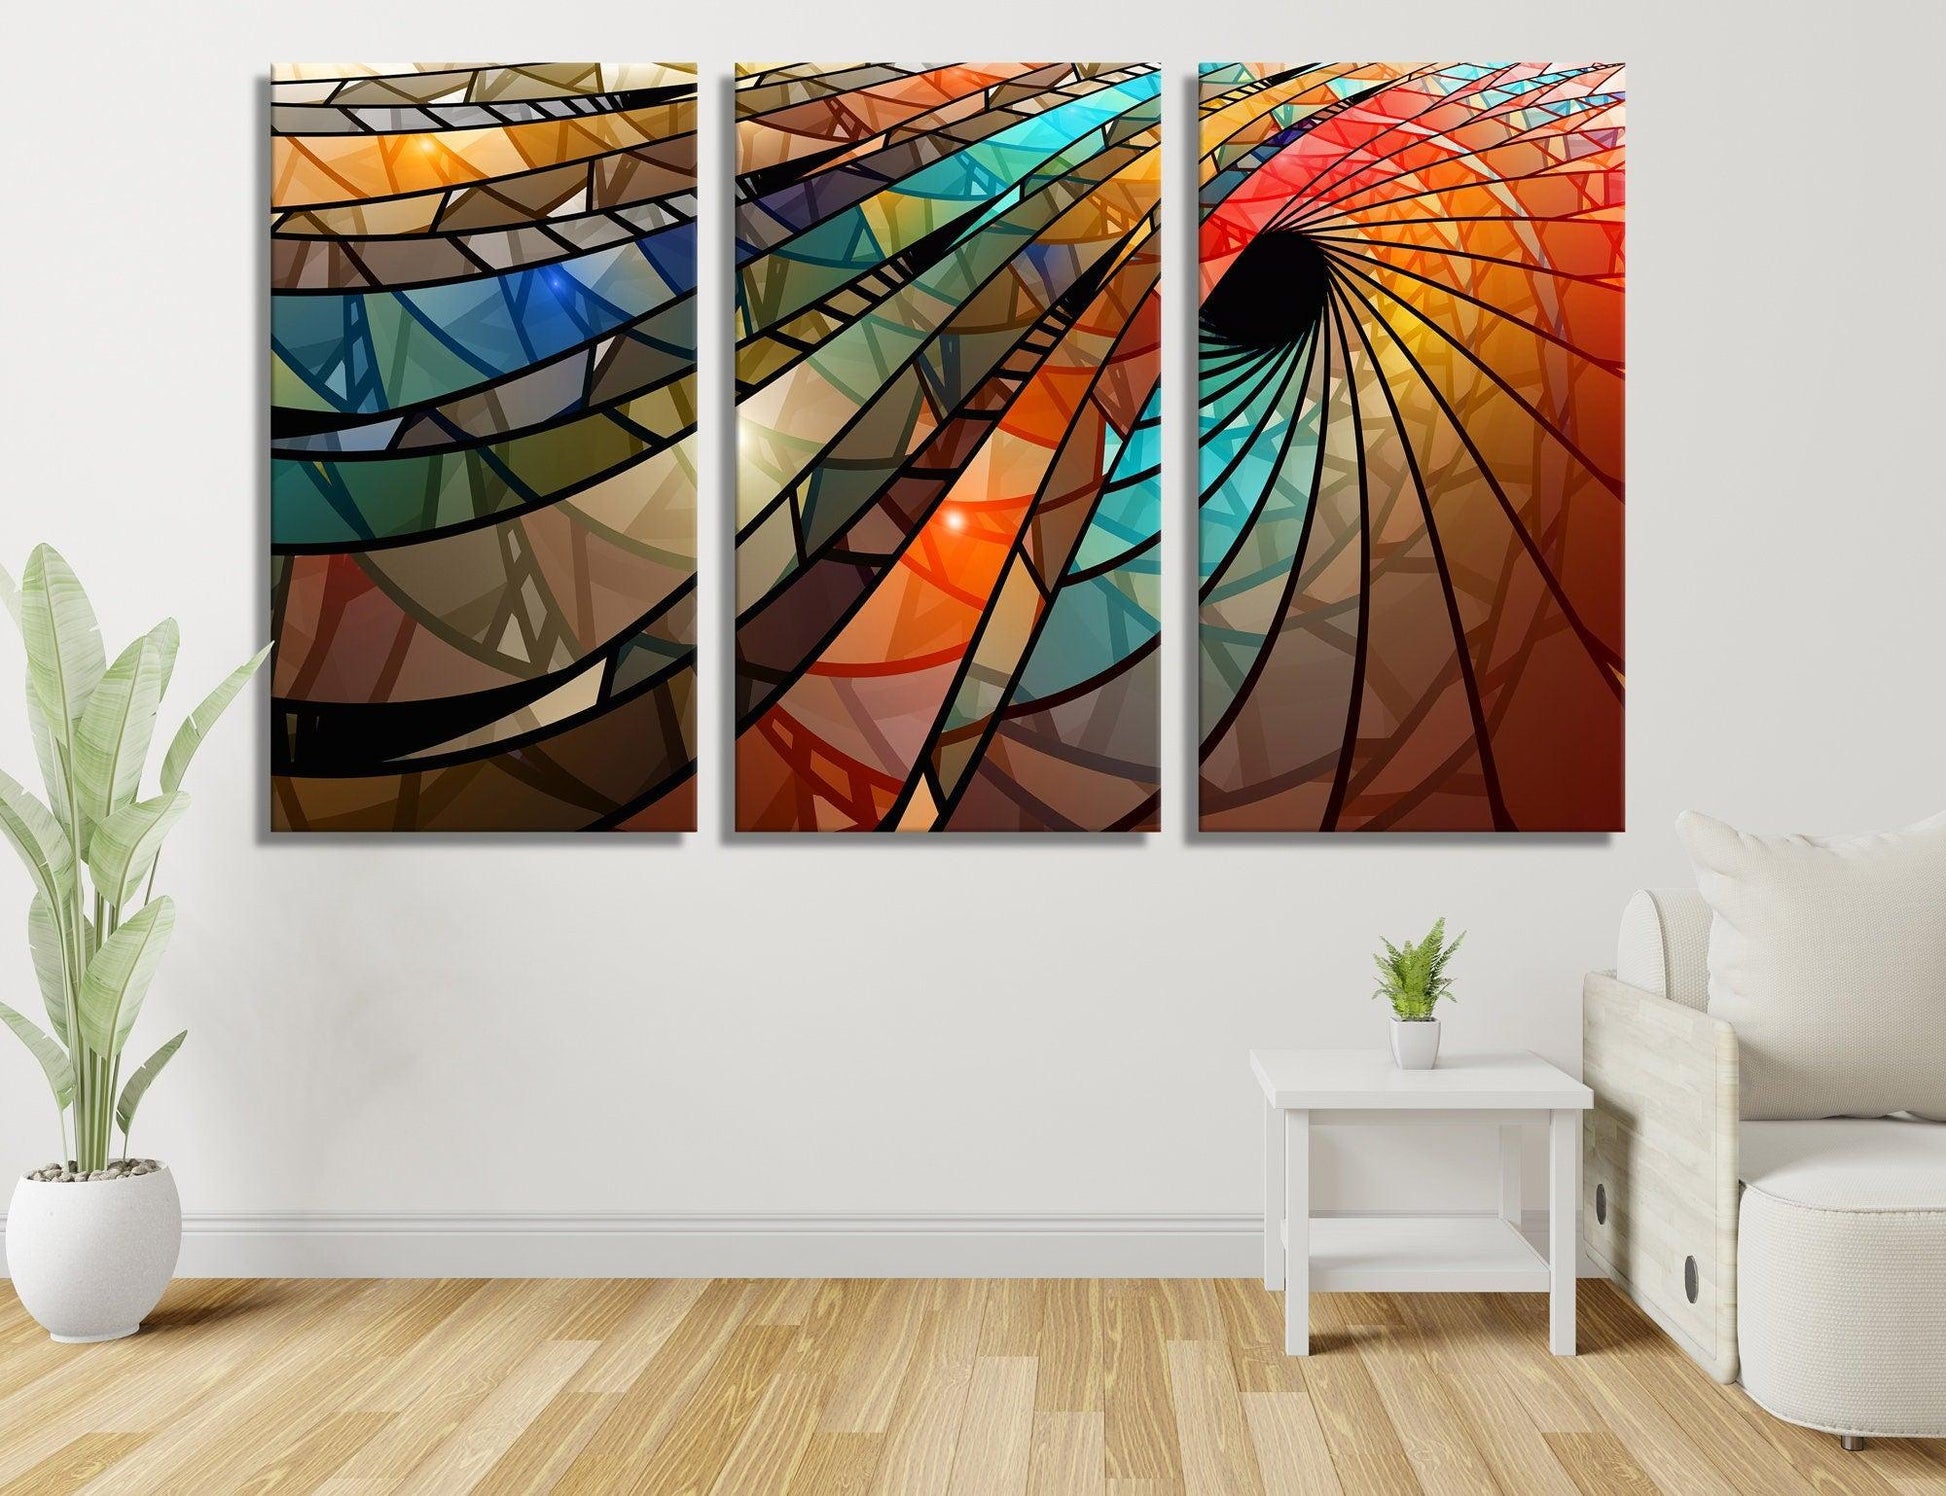 Office Wall Decor| alcohol Ink Abstract, abstract Wall Art, abstract canvas wall art, Office Wall art, Colorful colorful, Stylish Design,